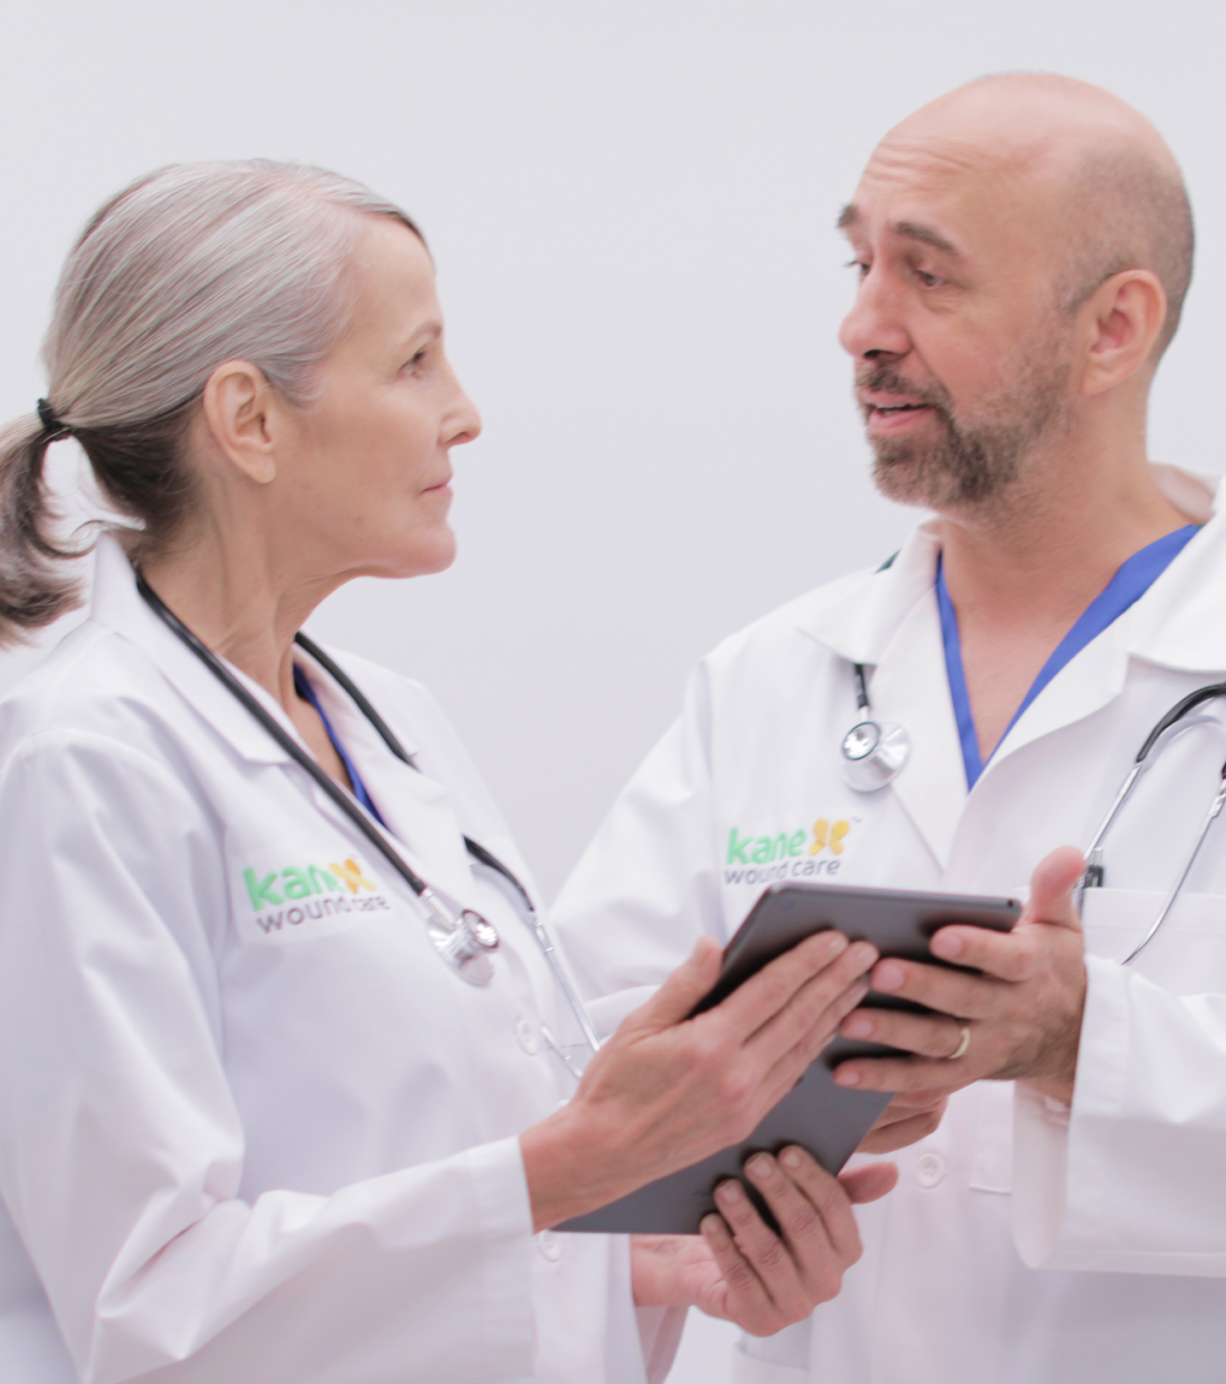 Two doctors talk while holding an ipad tablet